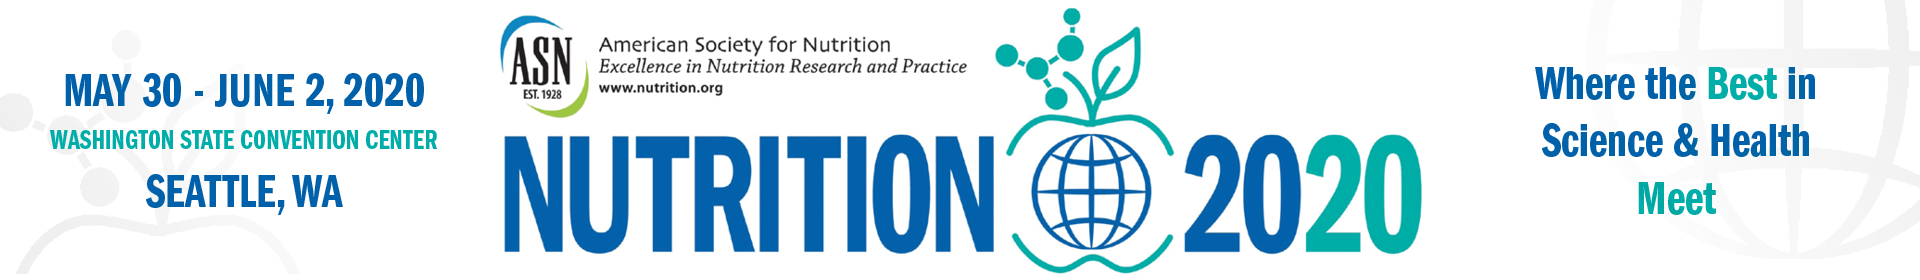 Nutrition 2020, ASN Scientific Sessions & Annual Meeting Event Banner